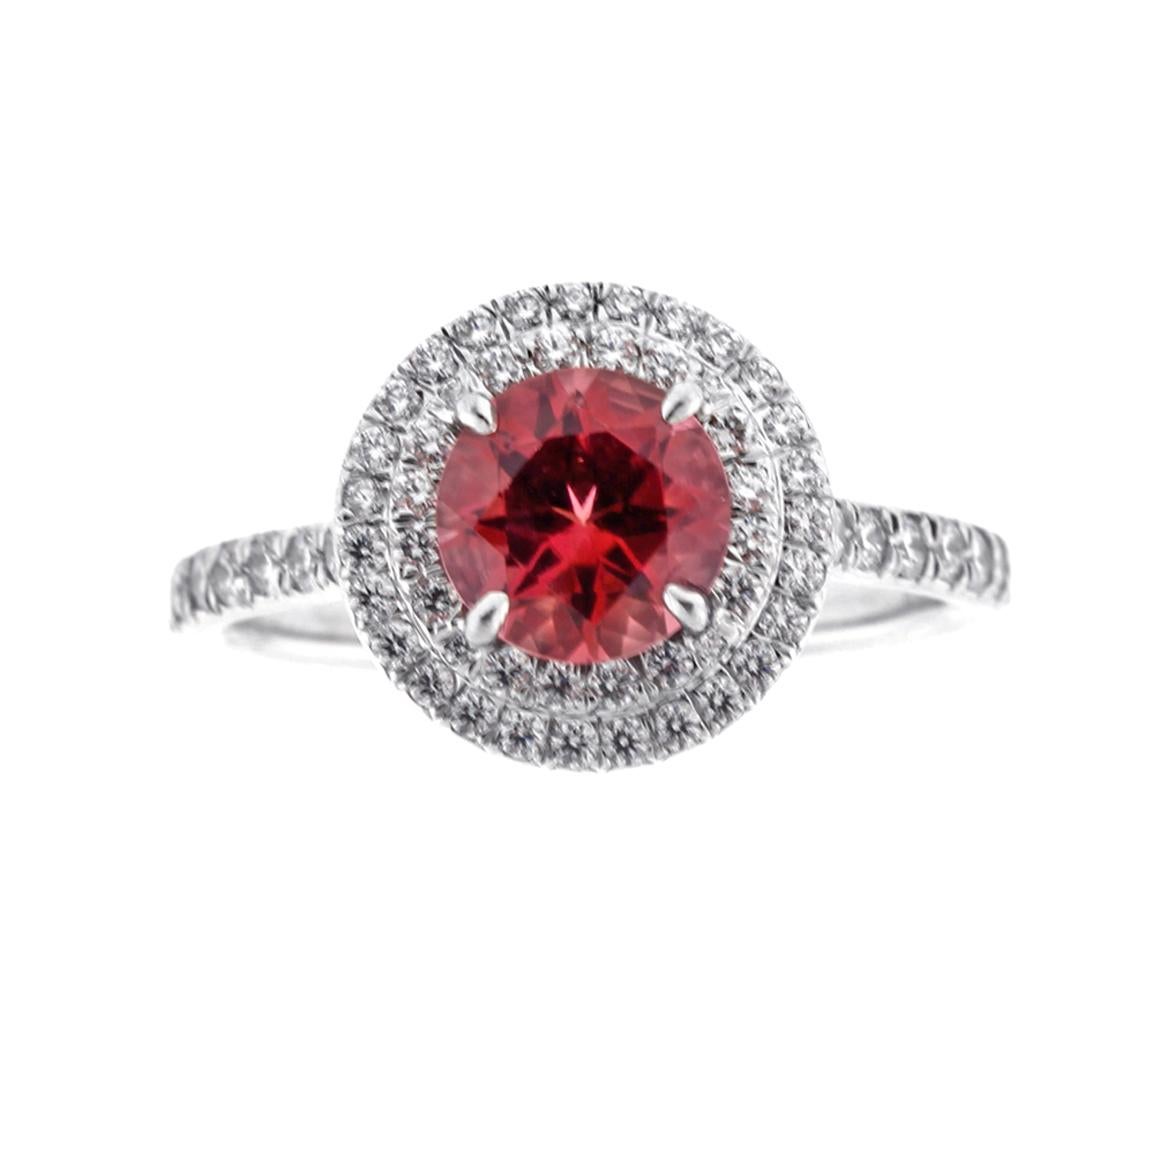 From Tiffany & Co.'s Soleste collection, Shimmering diamonds surround an intensely colored pink Tourmaline.
Platinum ring with a 6.5mm pink Tourmaline  and a double row of round brilliant diamonds. (Medium size)
♦ Designer: Tiffany & Co.
♦ Metal: